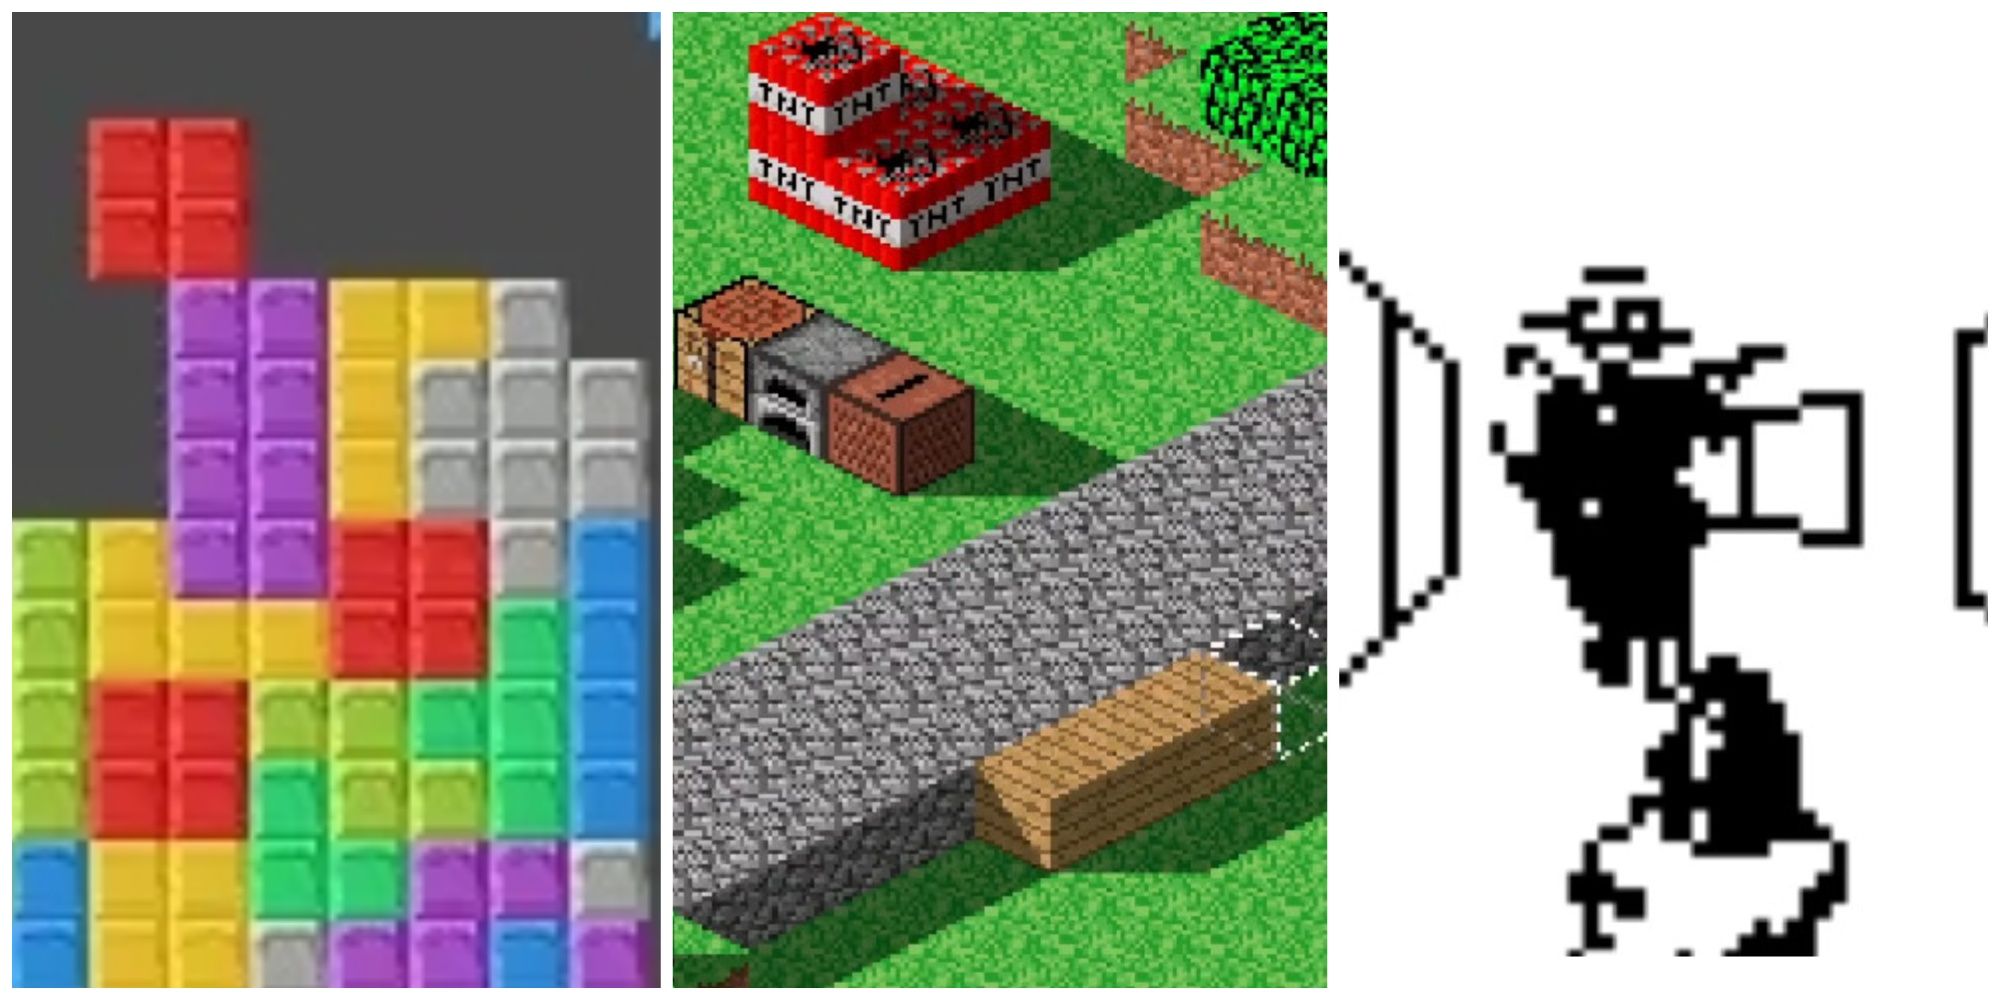 Left: Tetris blocks. Middle: An isometric view of Minecraft Blocks. Right: A black-and-white image of Doom for the calculator.